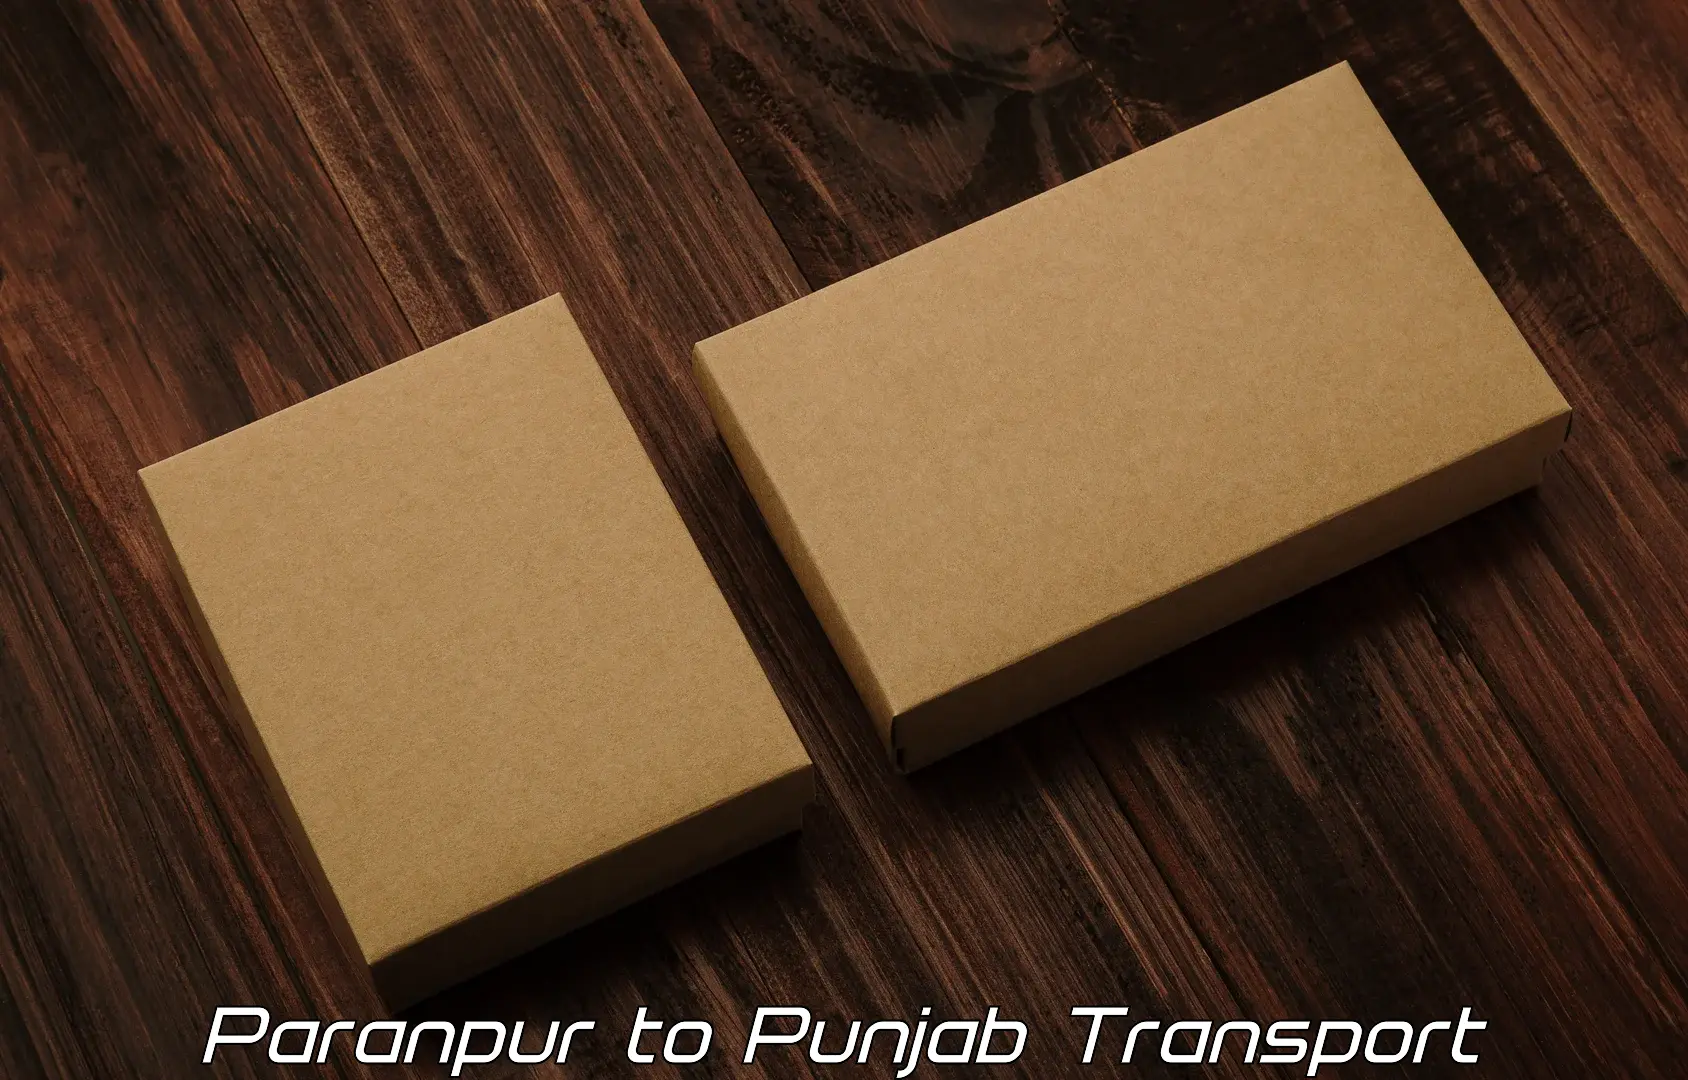 Vehicle transport services Paranpur to Malout